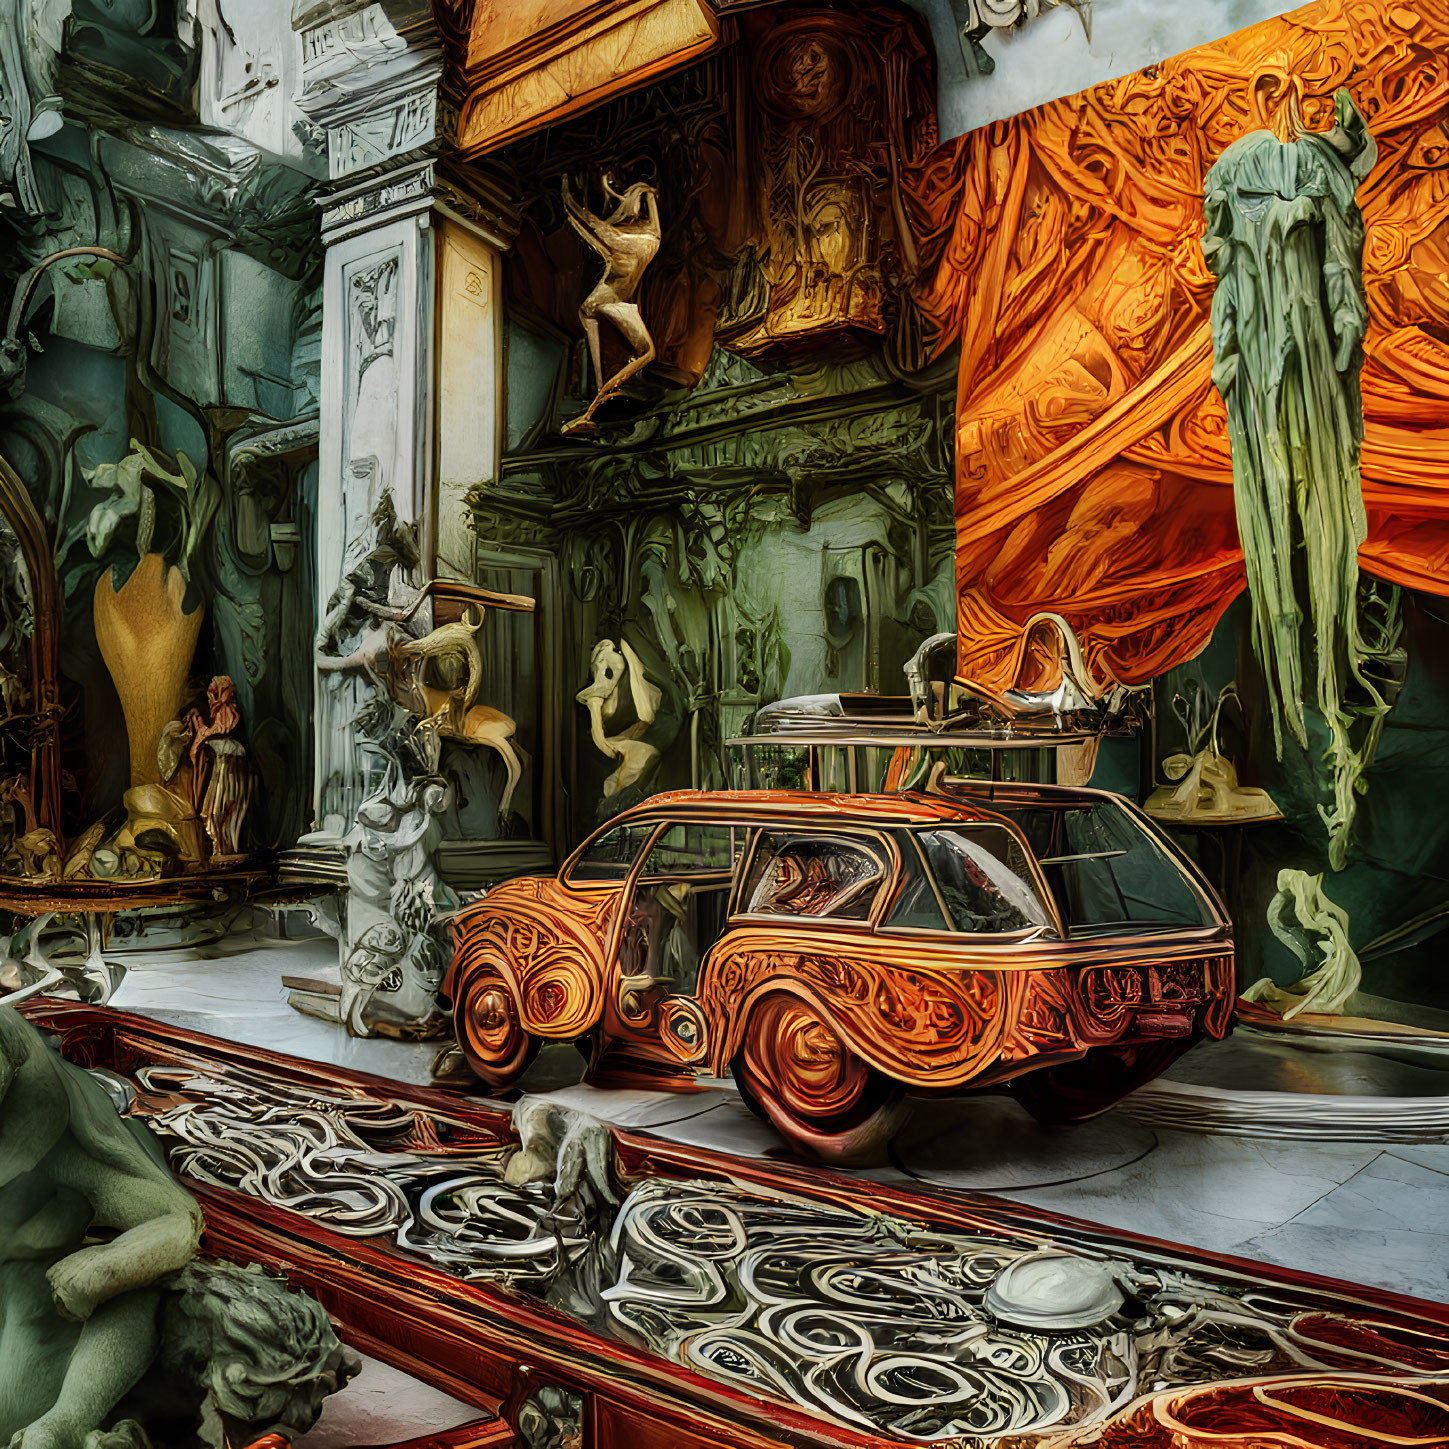 Vividly colored surreal image blending classical architecture with modern station wagon